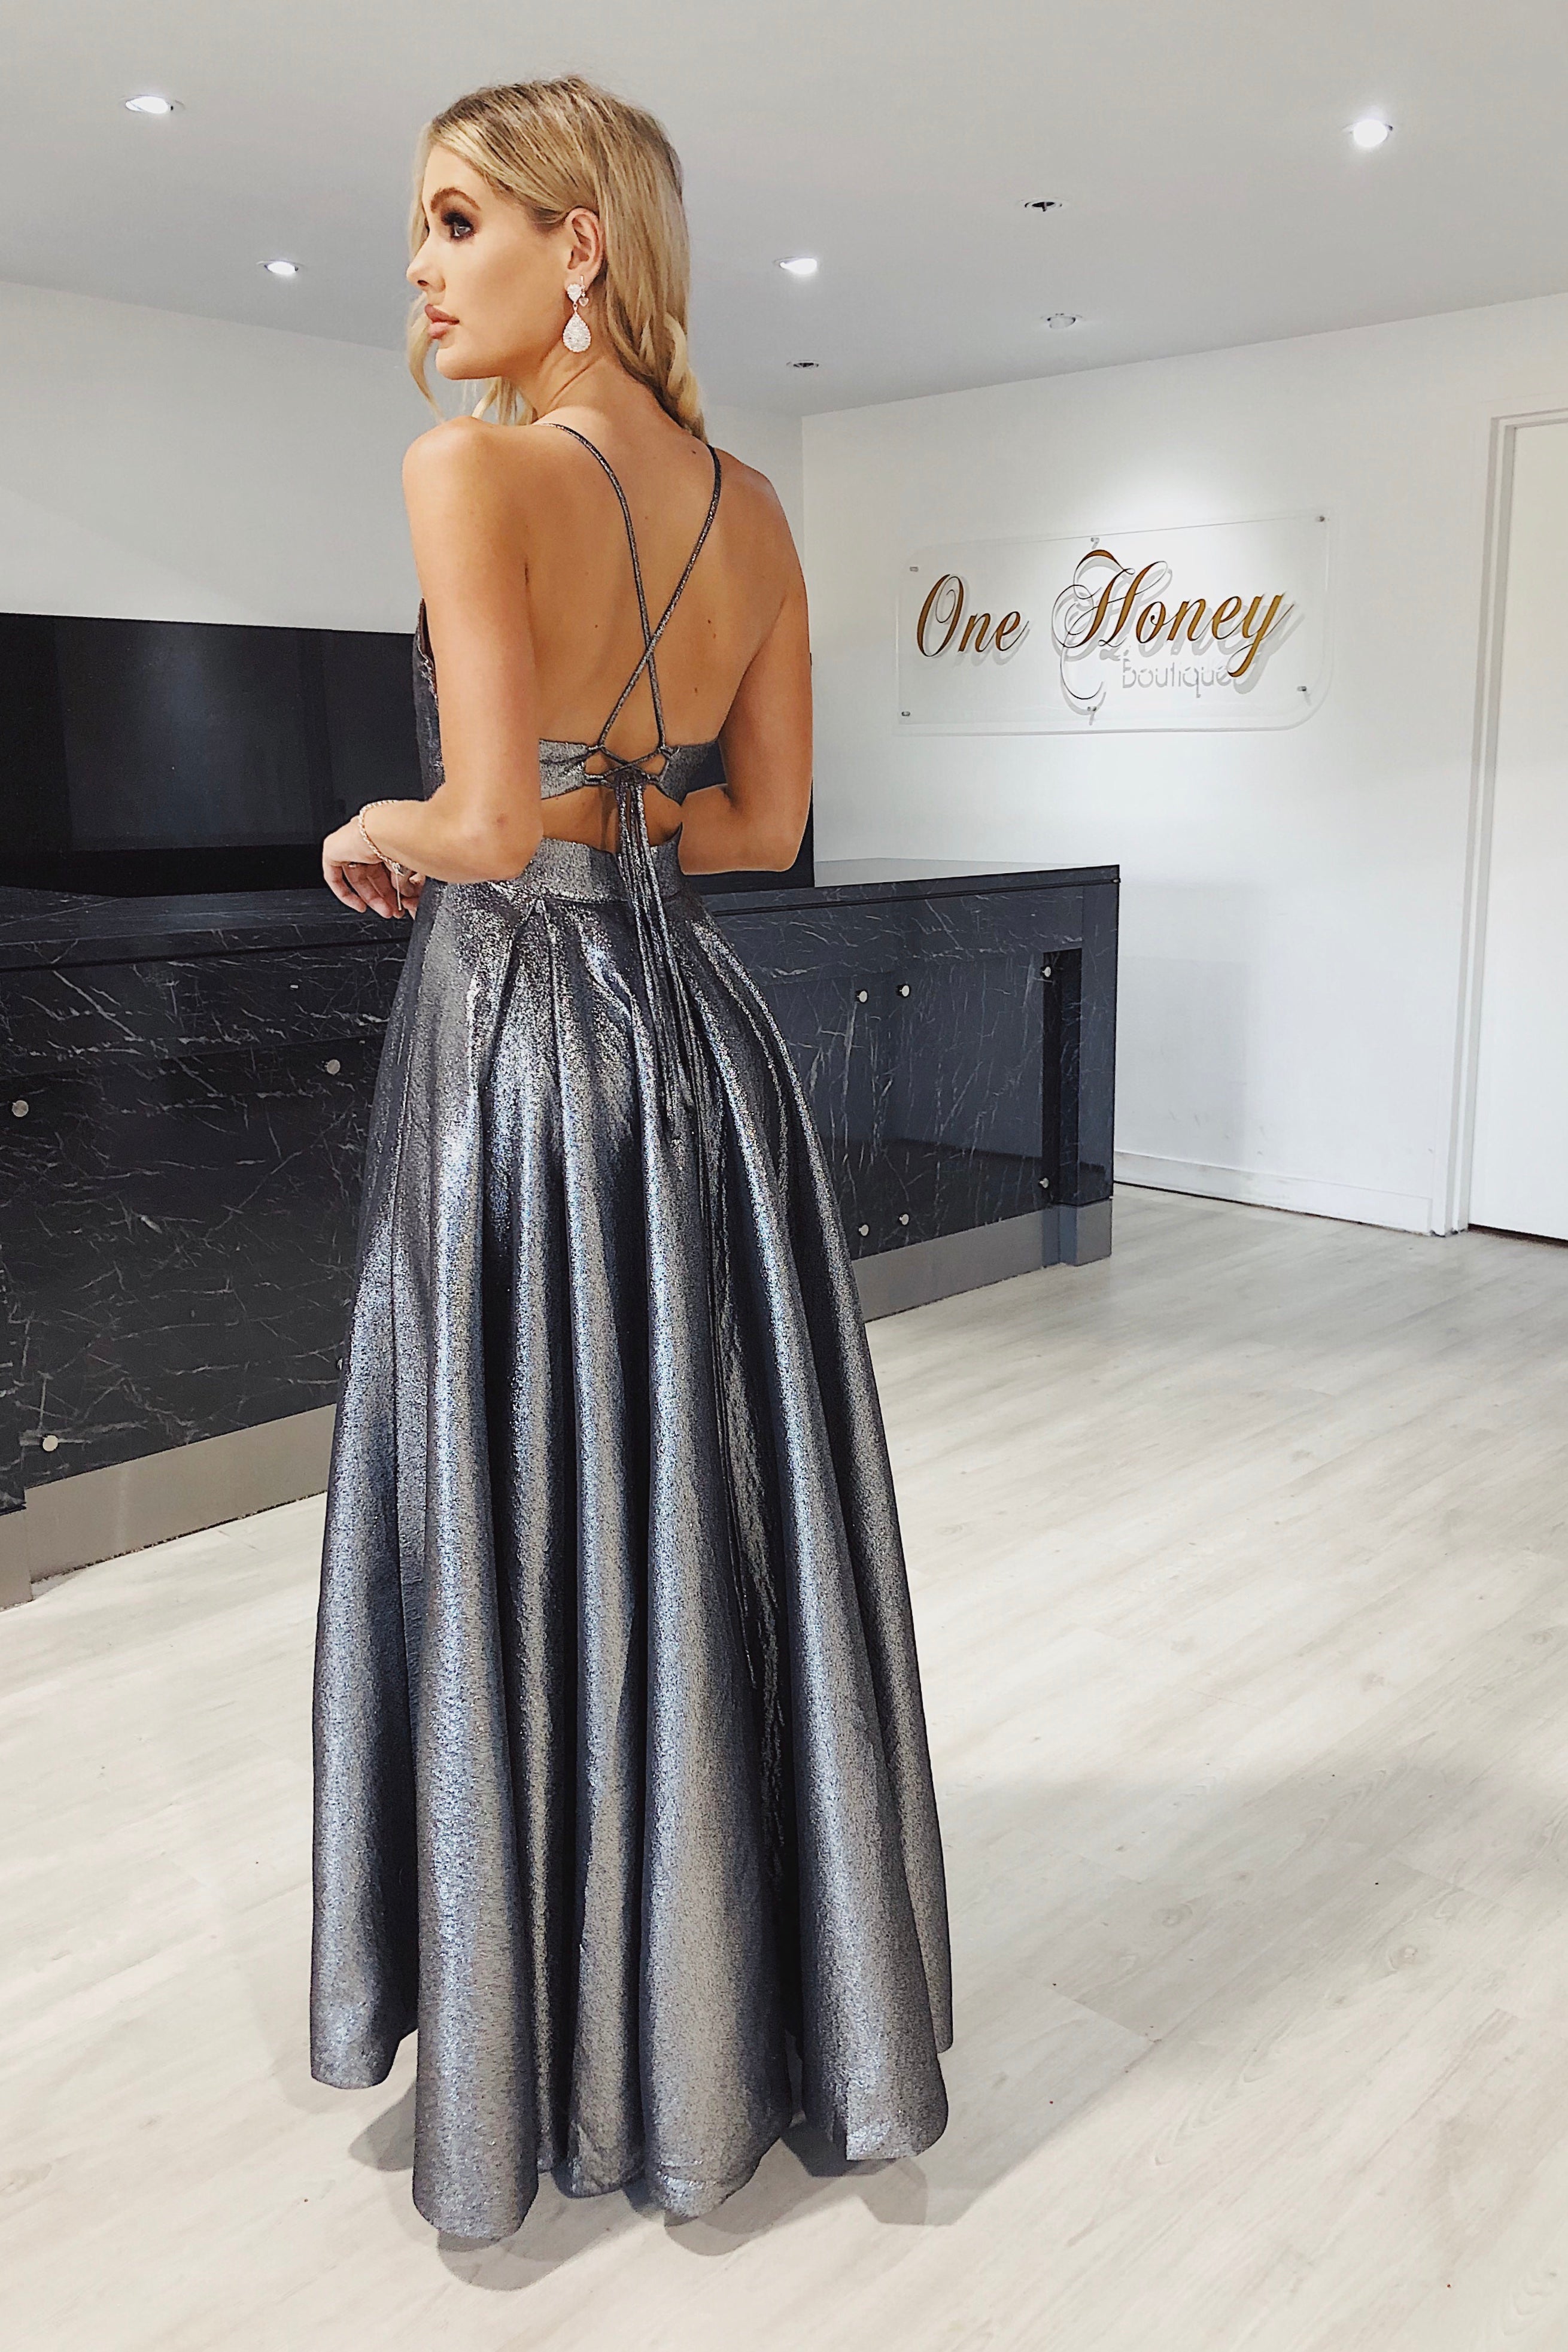 Honey Couture TAZMIN Gunmetal Metallic Silver Formal Gown Private Label$ AfterPay Humm ZipPay LayBuy Sezzle